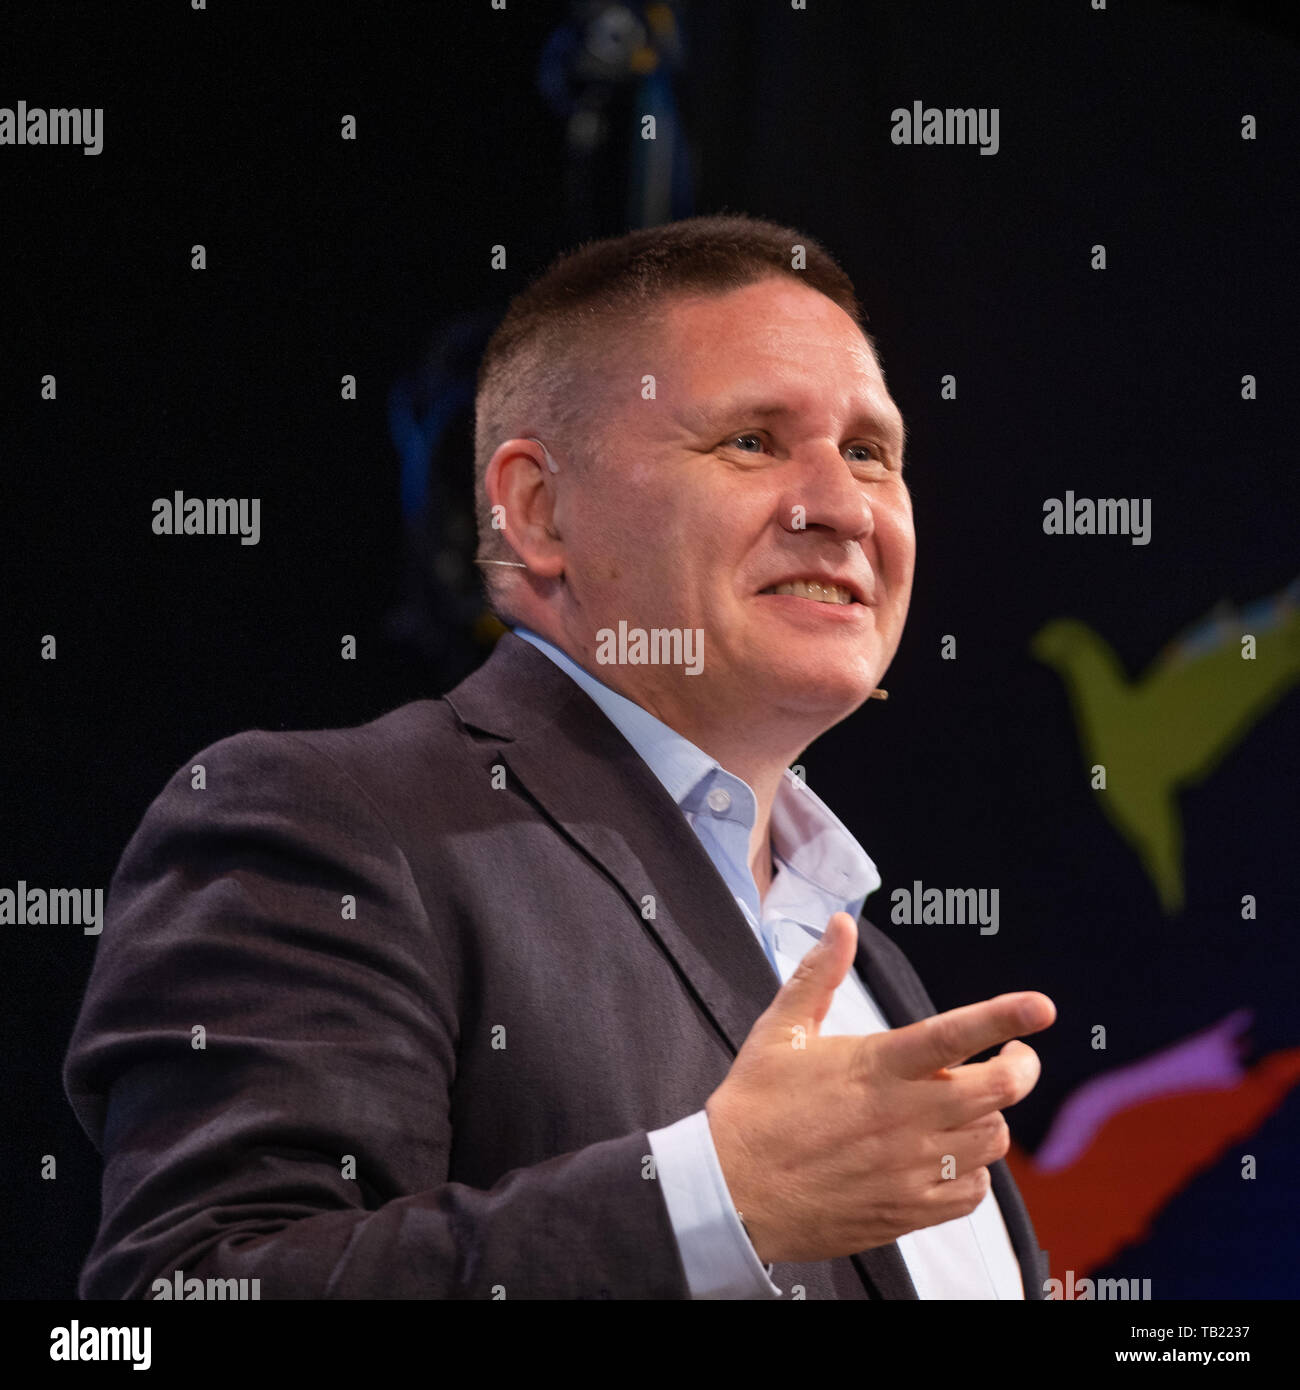 The Hay Festival, Hay on Wye, Wales UK, Wednesday 29th May 2019. Adrian Edwards, lead curator of the British Museum 2019 blockbuster exhibition ‘Writing: Making Your Mark', speaking about the collection at the 32nd annual Hay Festival of Literature and the Arts. Credit: keith morris/Alamy Live News Stock Photo